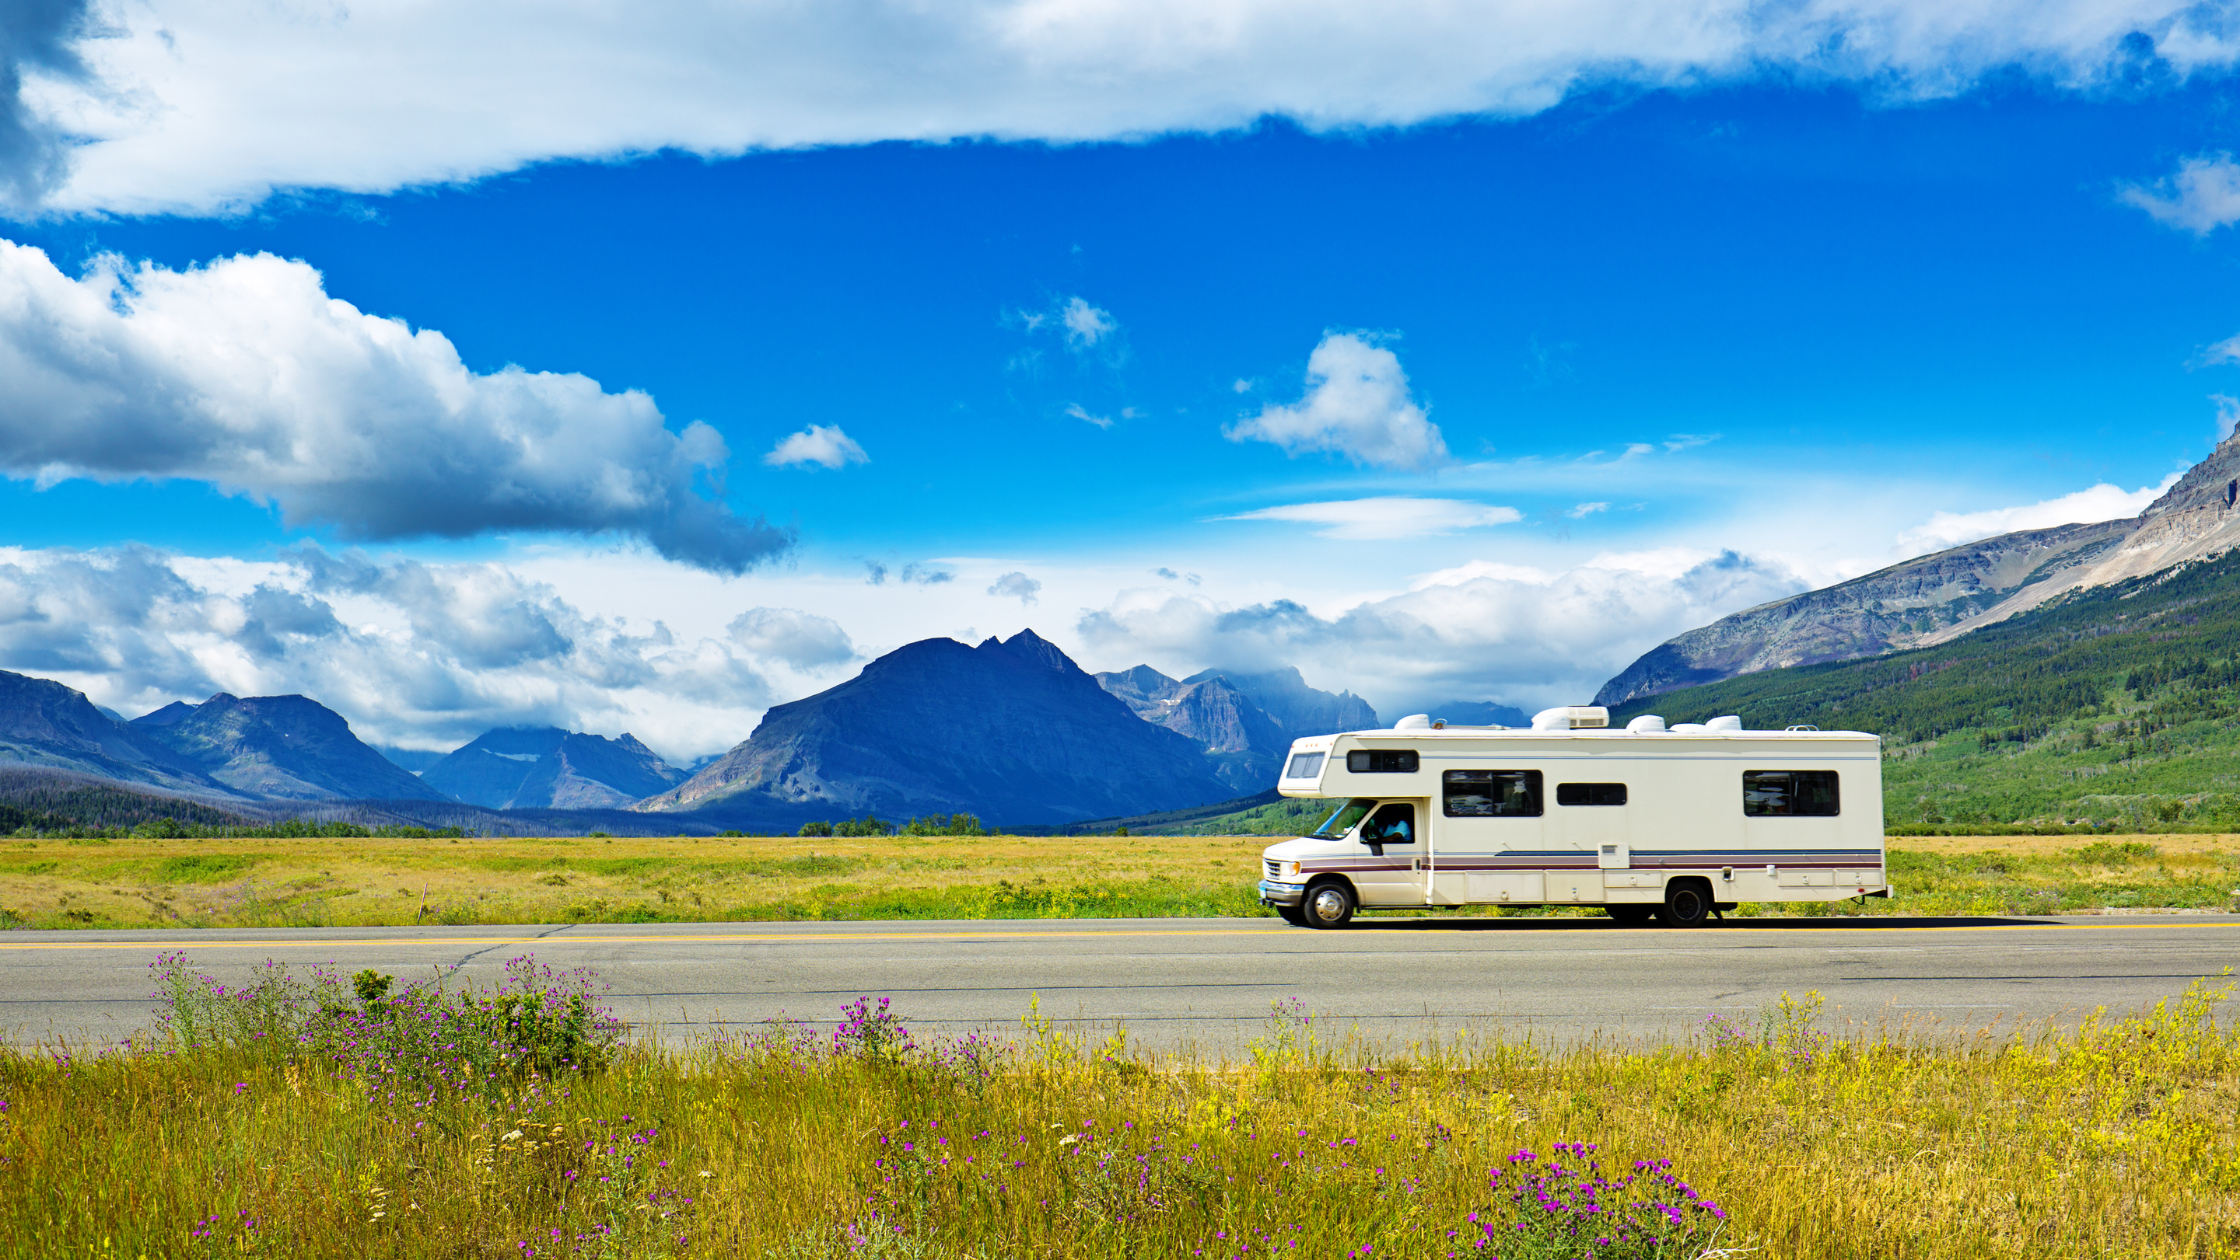 Spring RV Camping Destinations For Families